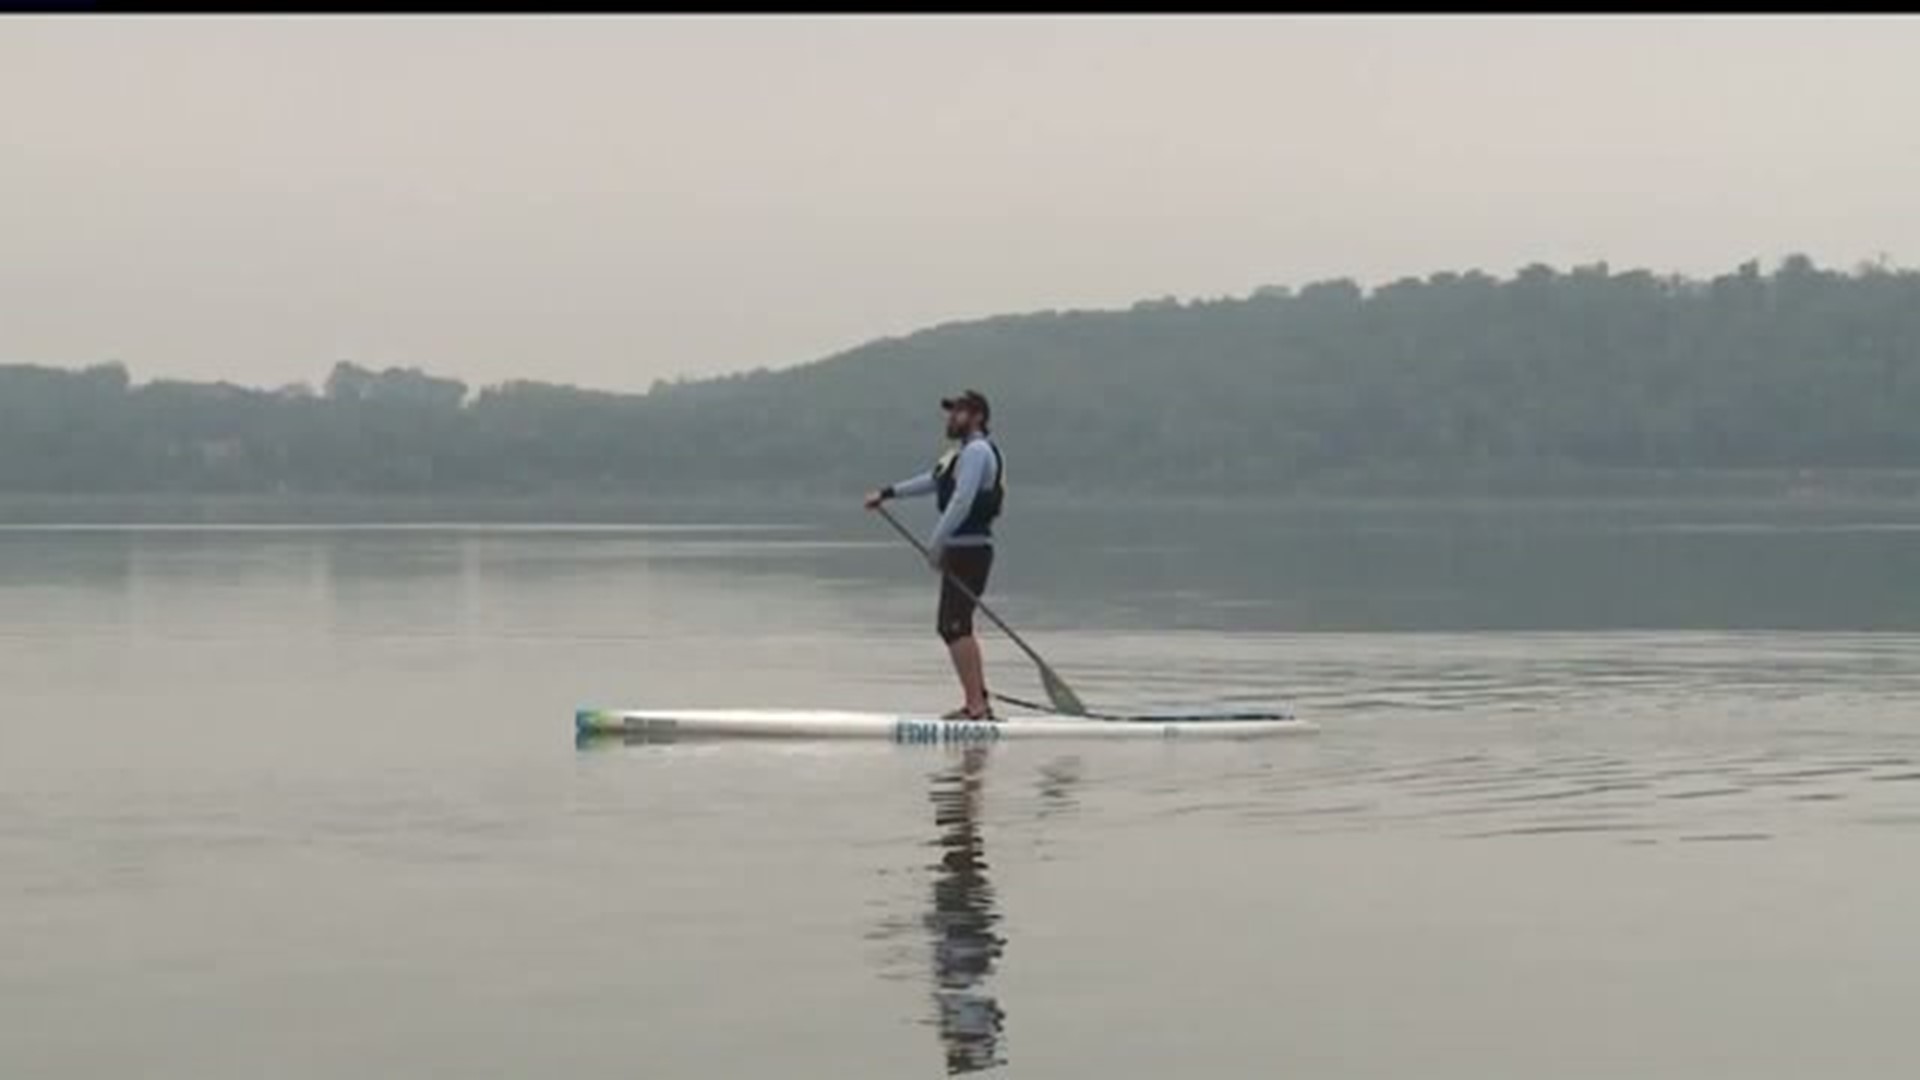 National Water Safety month brings tips for water activities